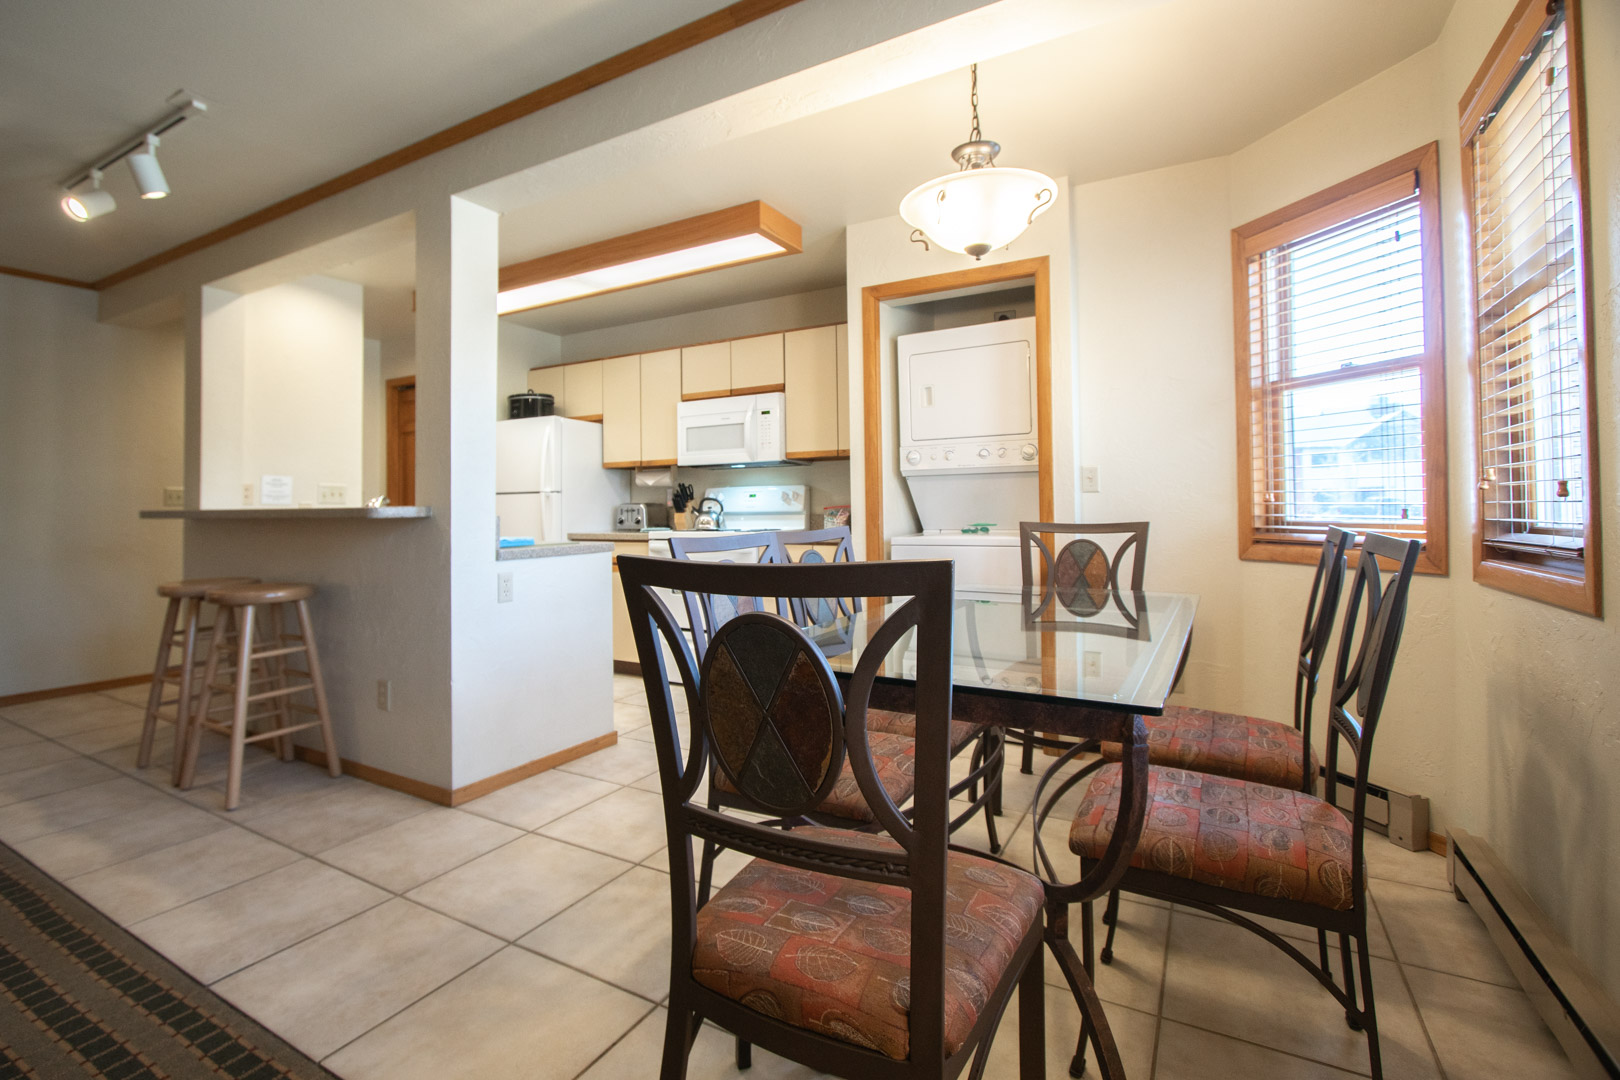 A fully equipped kitchen and dining table at VRI's Sunburst Resort in Steamboat Springs, Colorado.